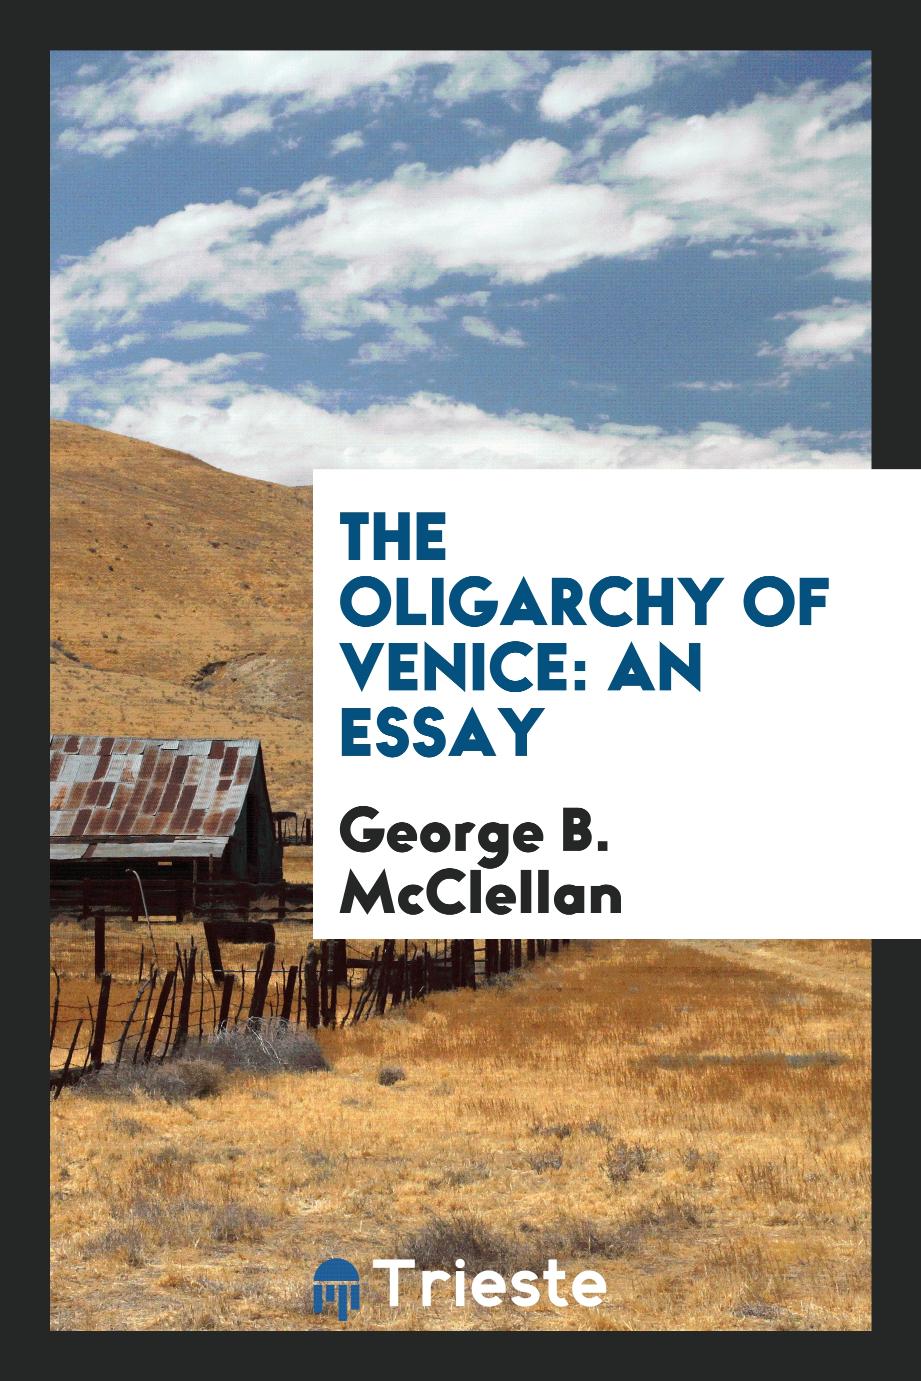 The oligarchy of Venice: an essay